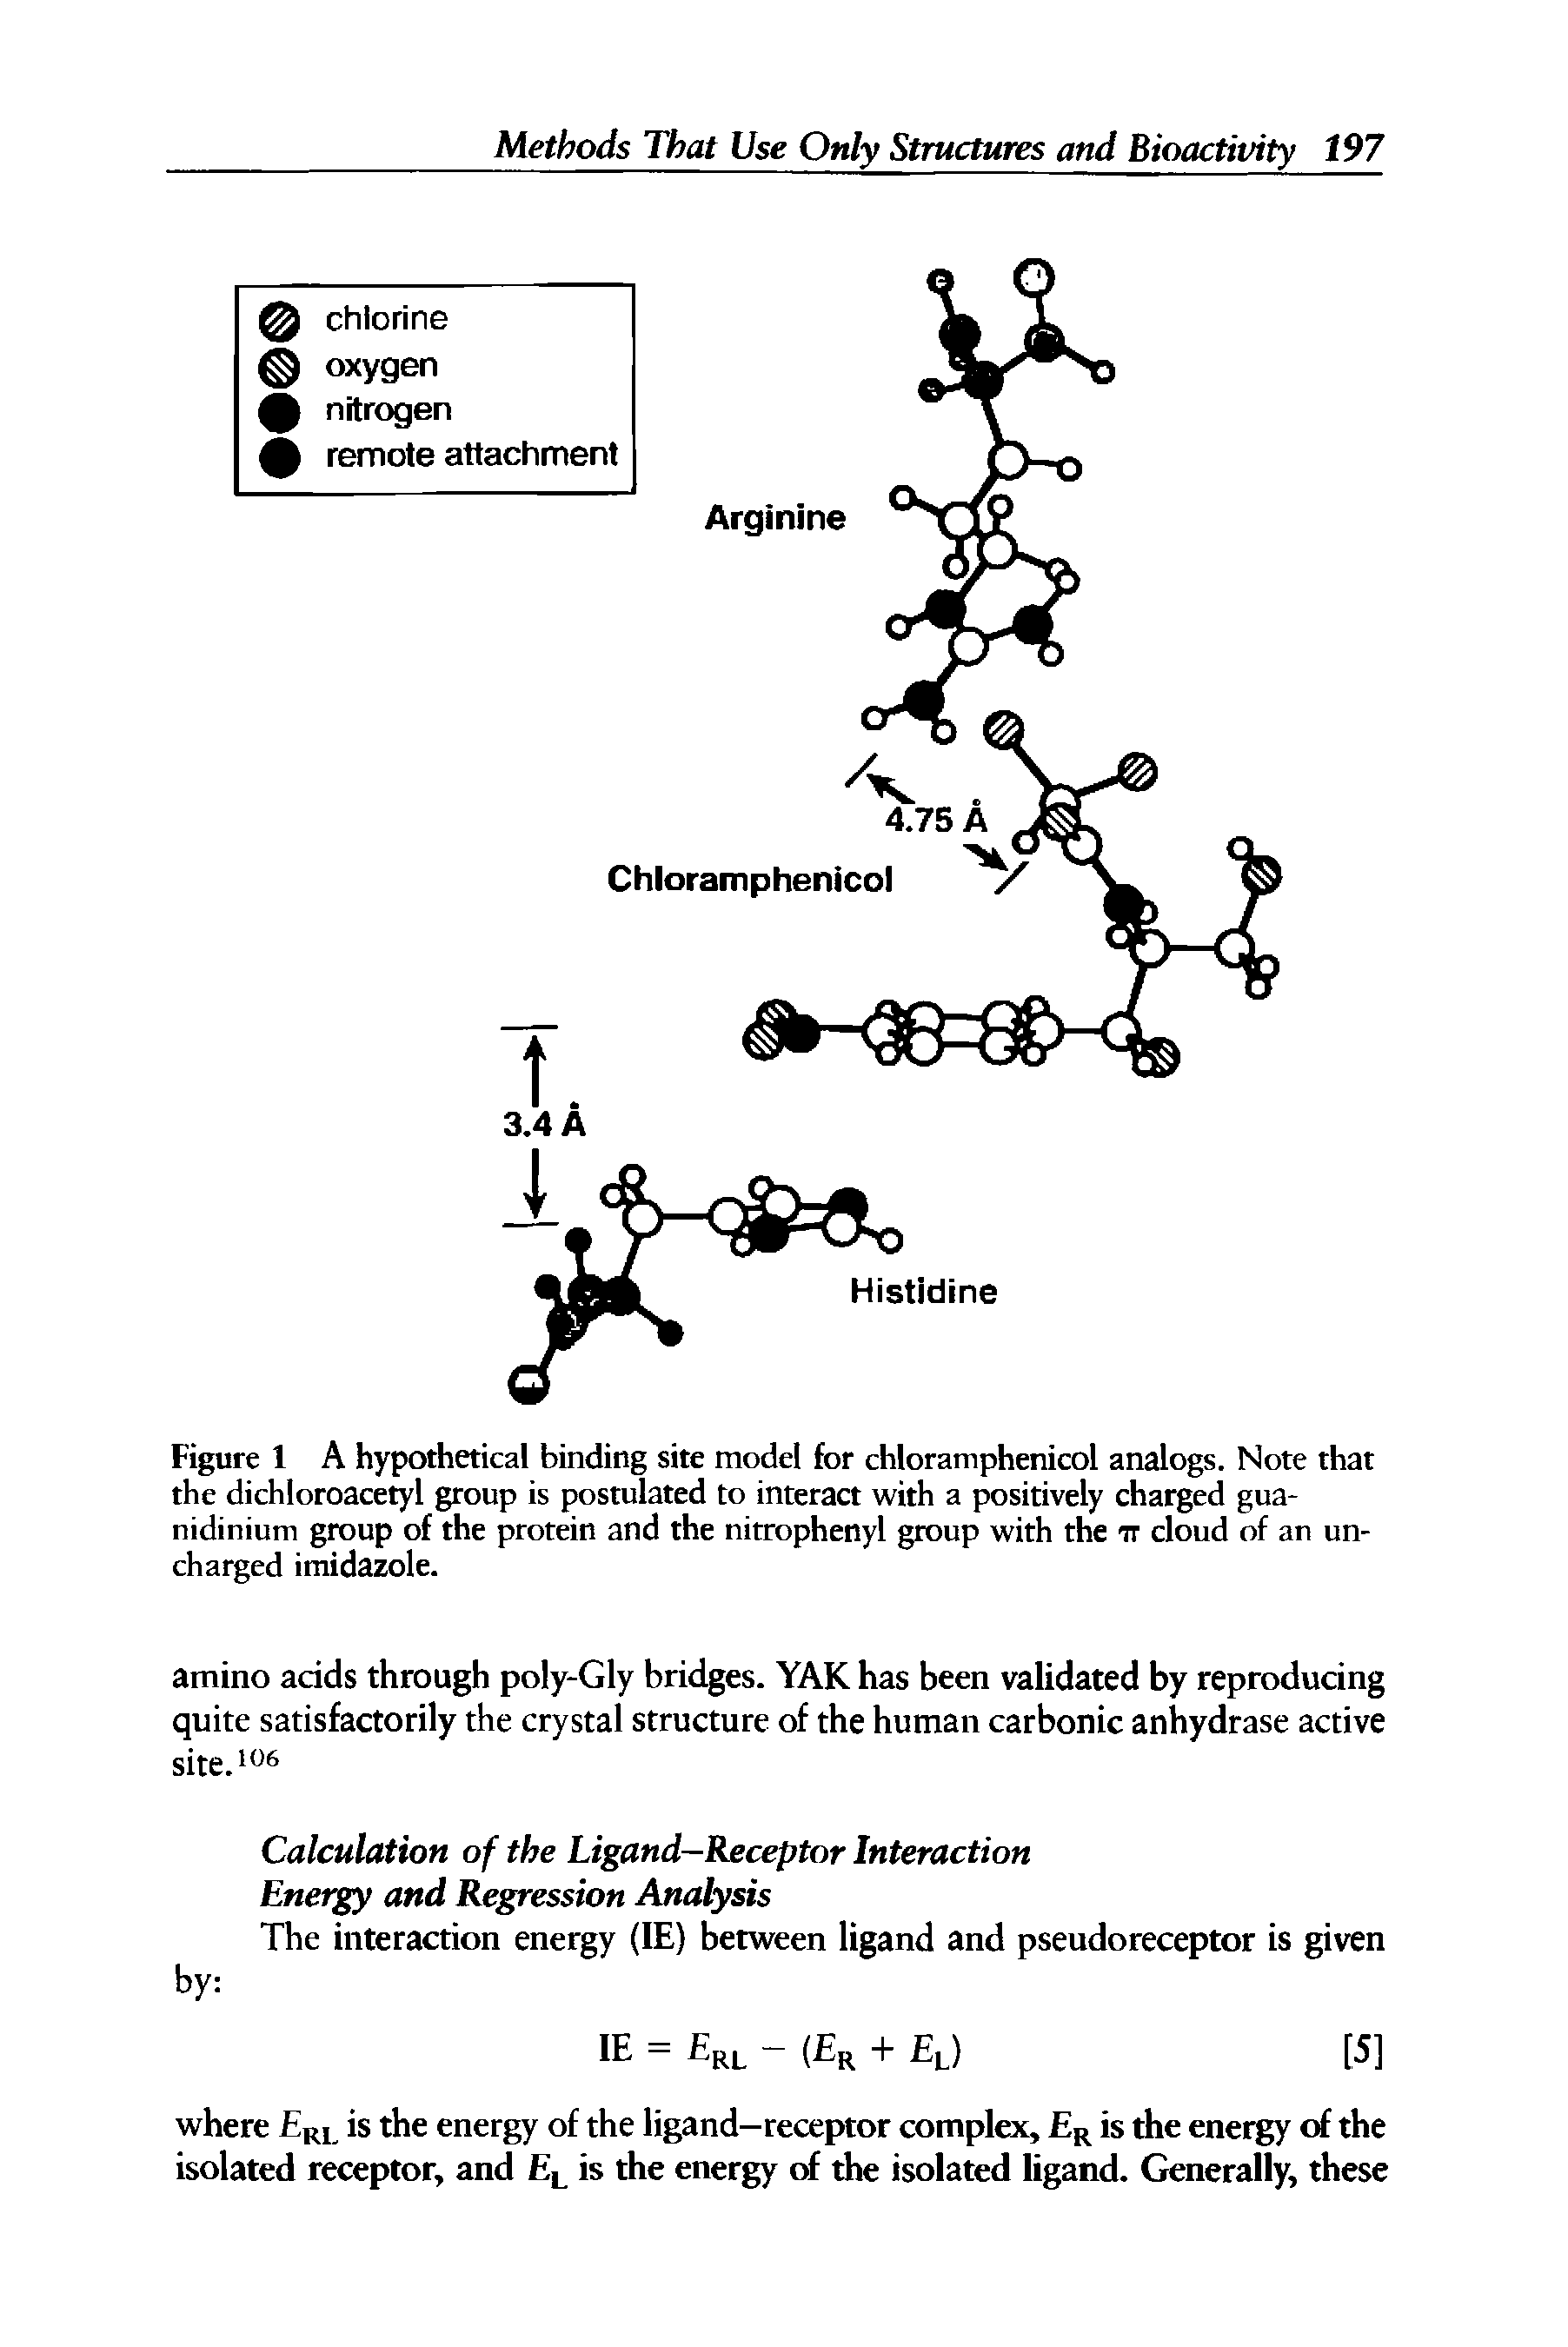 Figure 1 A hypothetical binding site model for chloramphenicol analogs. Note that the dichloroacetyl group is postulated to interact with a positively charged gua-nidinium group of the protein and the nitrophenyl group with the it cloud of an uncharged imidazole.